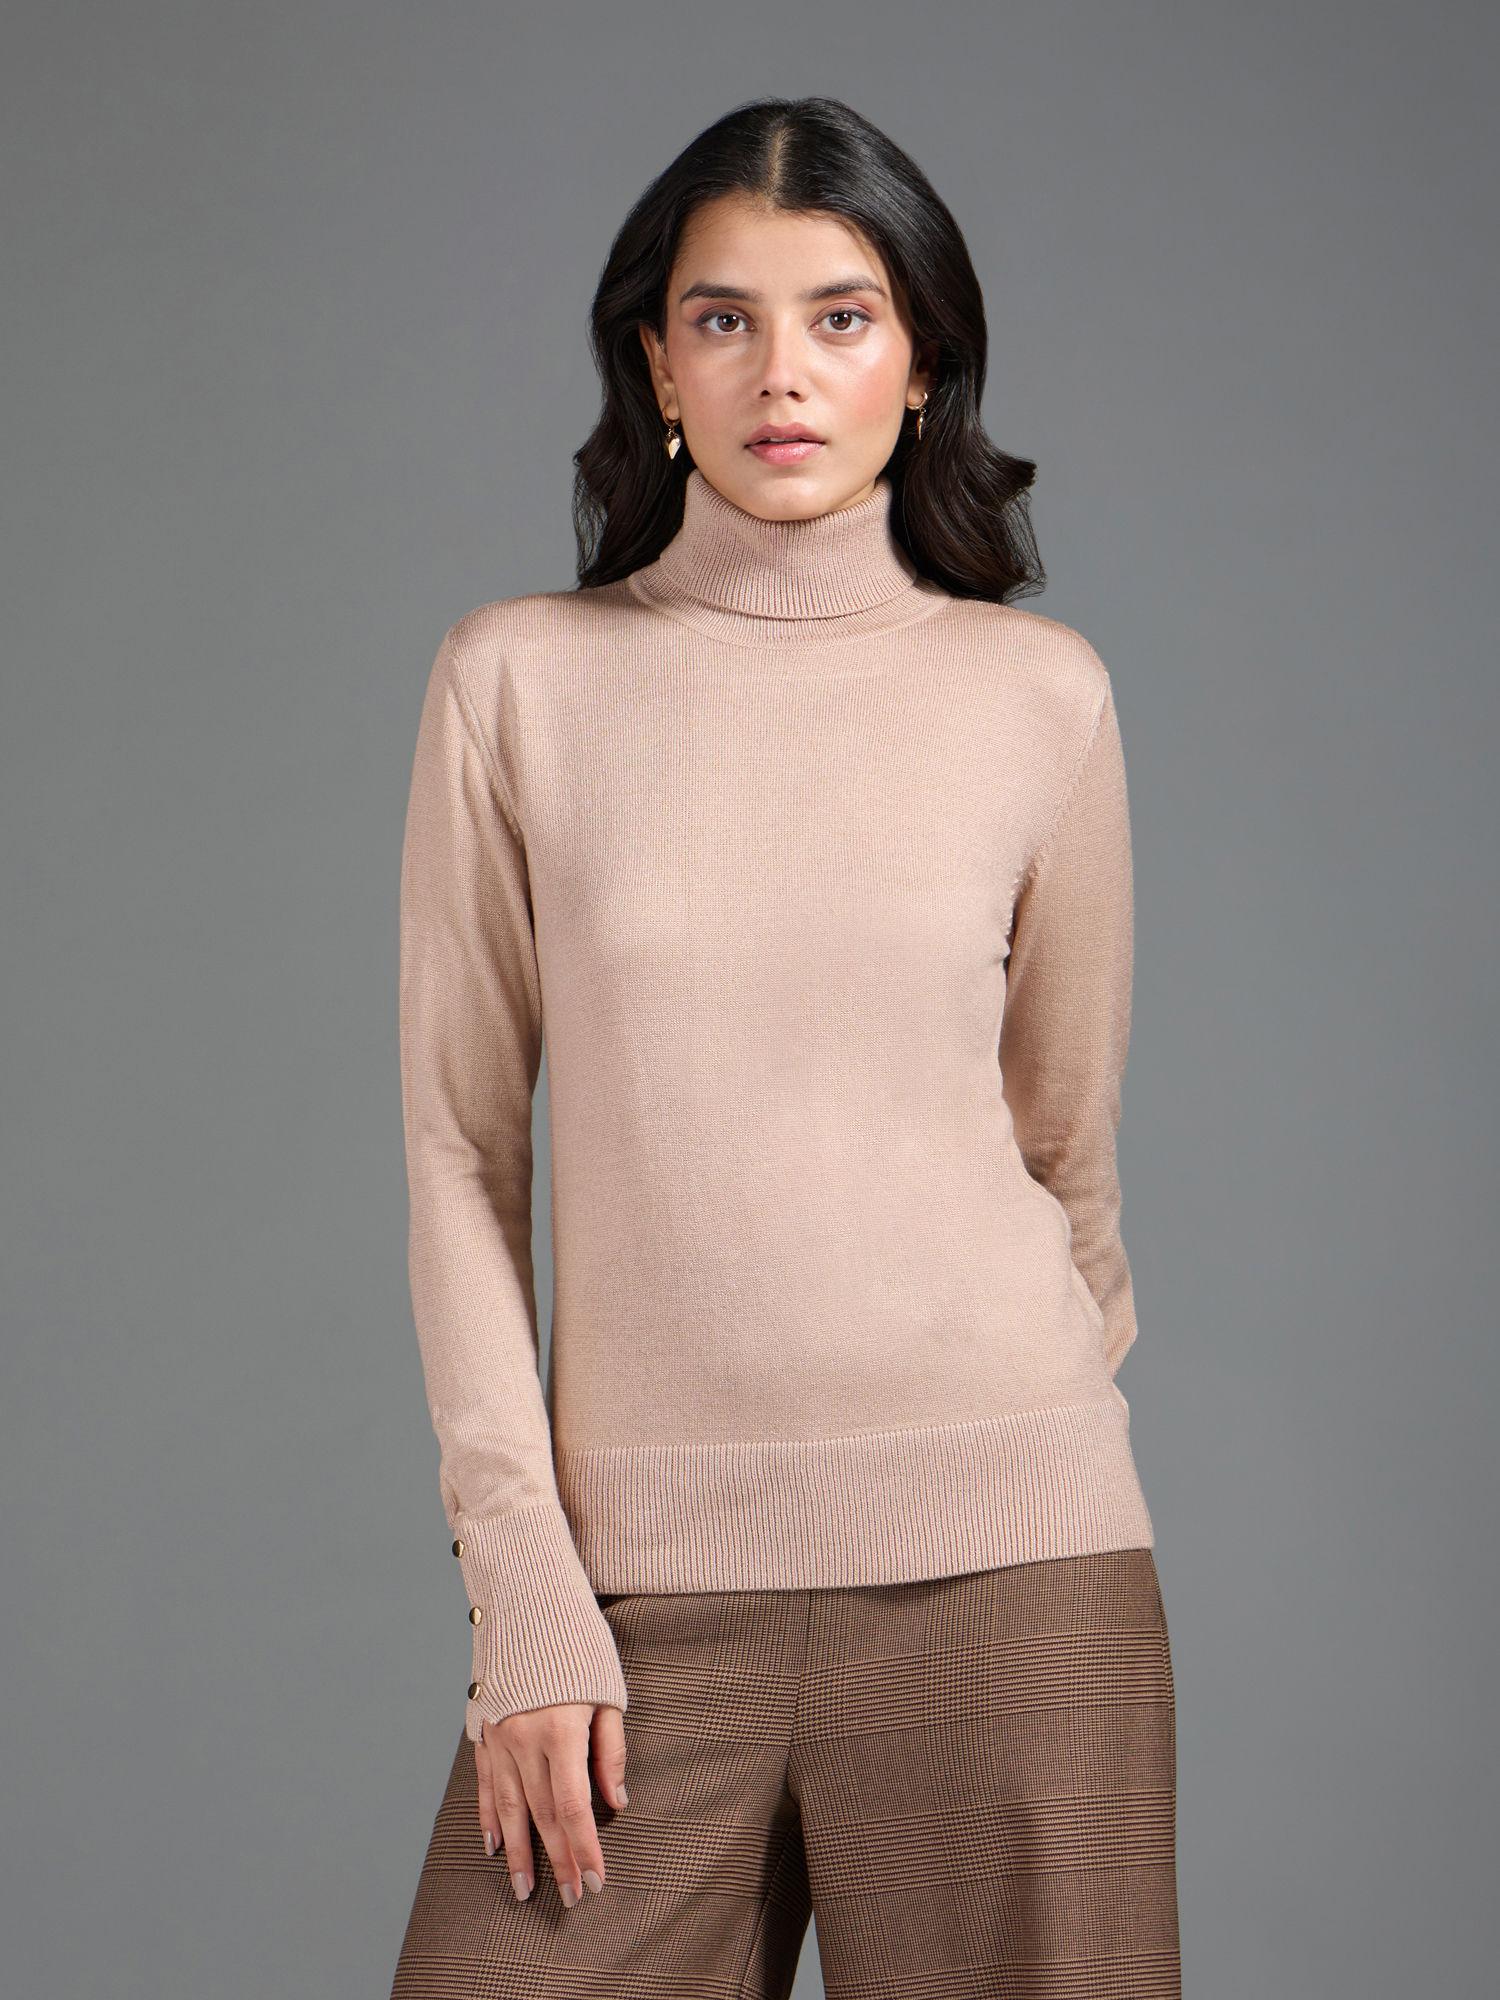 beige solid turtle neck buttoned cuffs sweater top